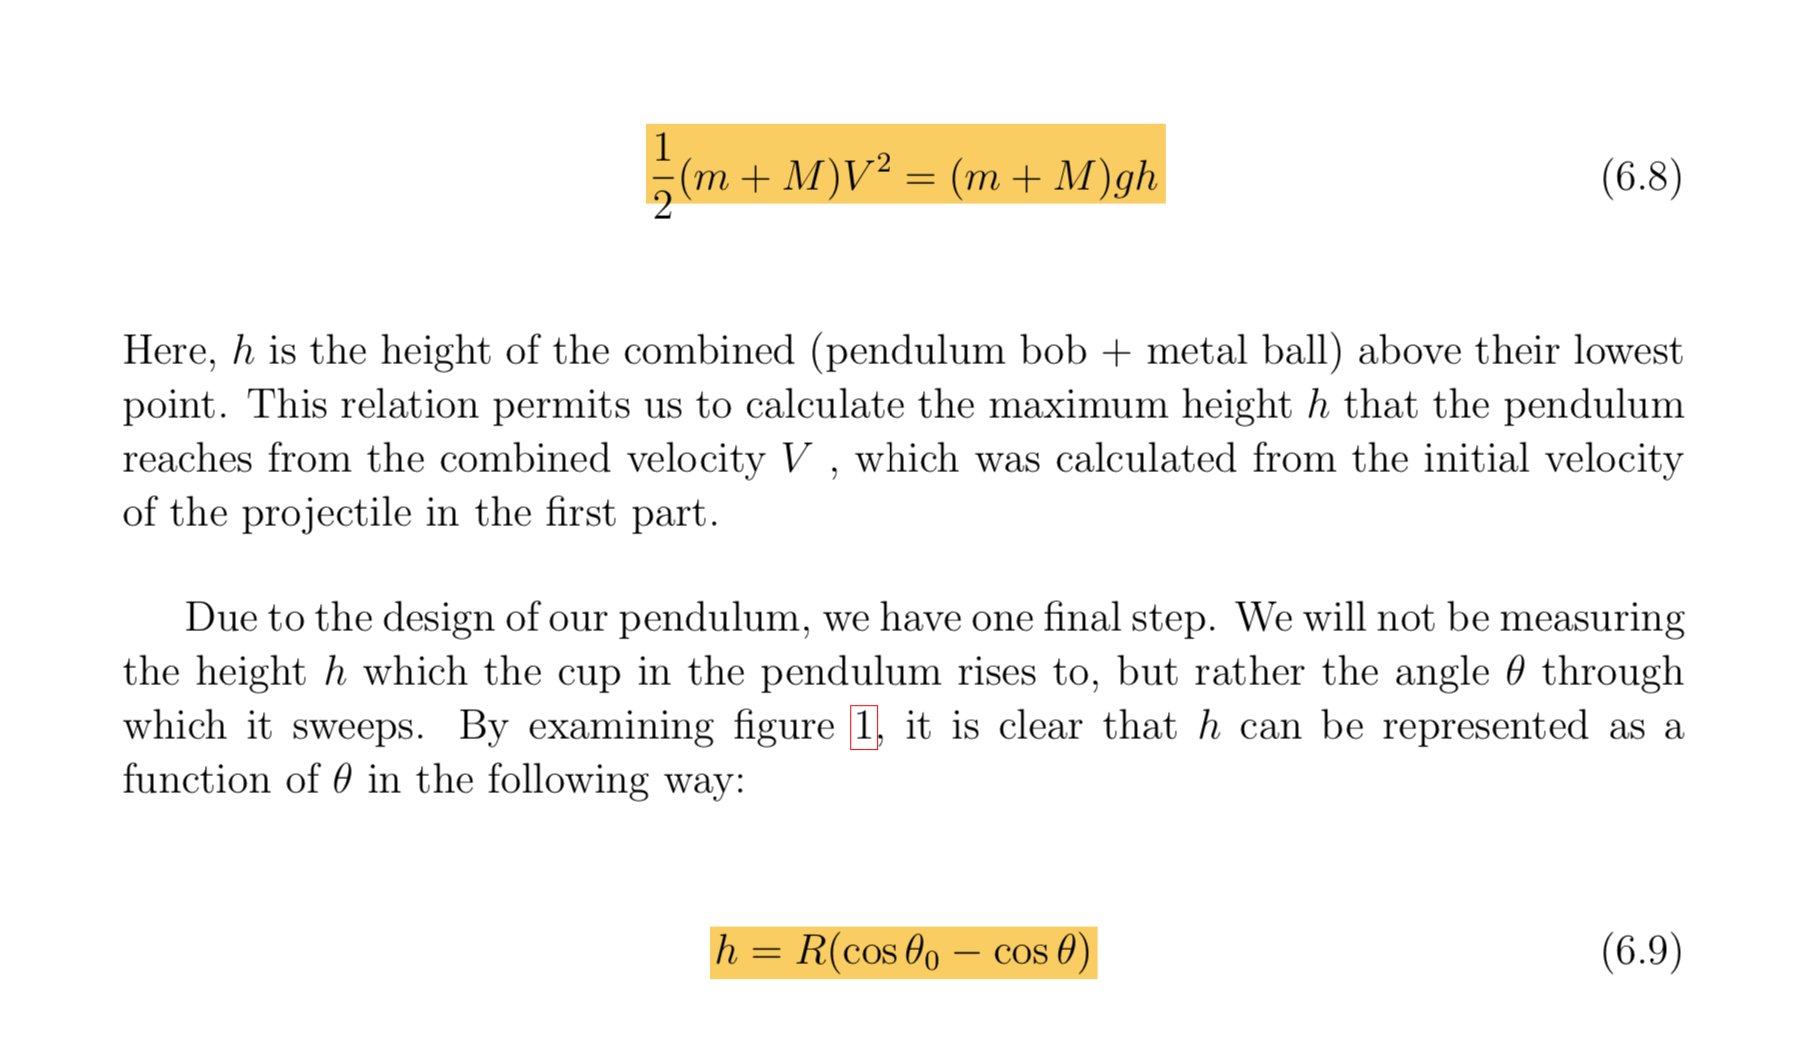 1
(m+ M)V2 (m+ M)gh
(6.8)
Here, h is the height of the combined (pendulum bob metal ball) above their lowest
point. This relation permits us to calculate the maximum height h that the pendulum
reaches from the combined velocity V , which was calculated from the initial velocity
of the projectile in the first part
Due to the design of our pendulum, we have one final step. We will not be measuring
the height h which the cup in the pendulum rises to, but rather the angle 0 through
which it sweeps. By examining figure 1, it is clear that h can be represented
function of 0 in the following way:
as a
R(cos 00 - cos 0)
(6.9)
h
11
